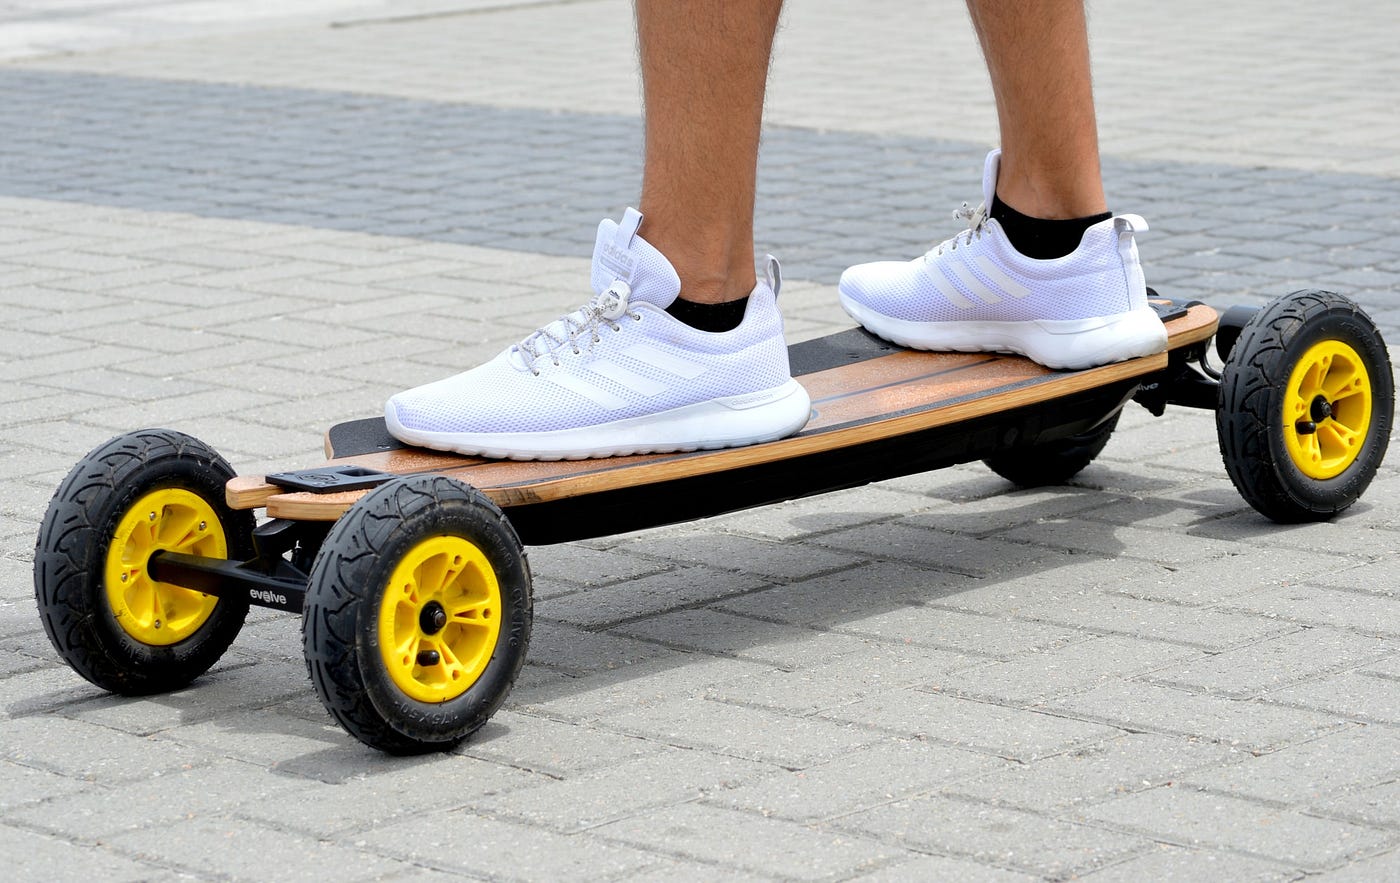 Why Should I Get An Electric Skateboard